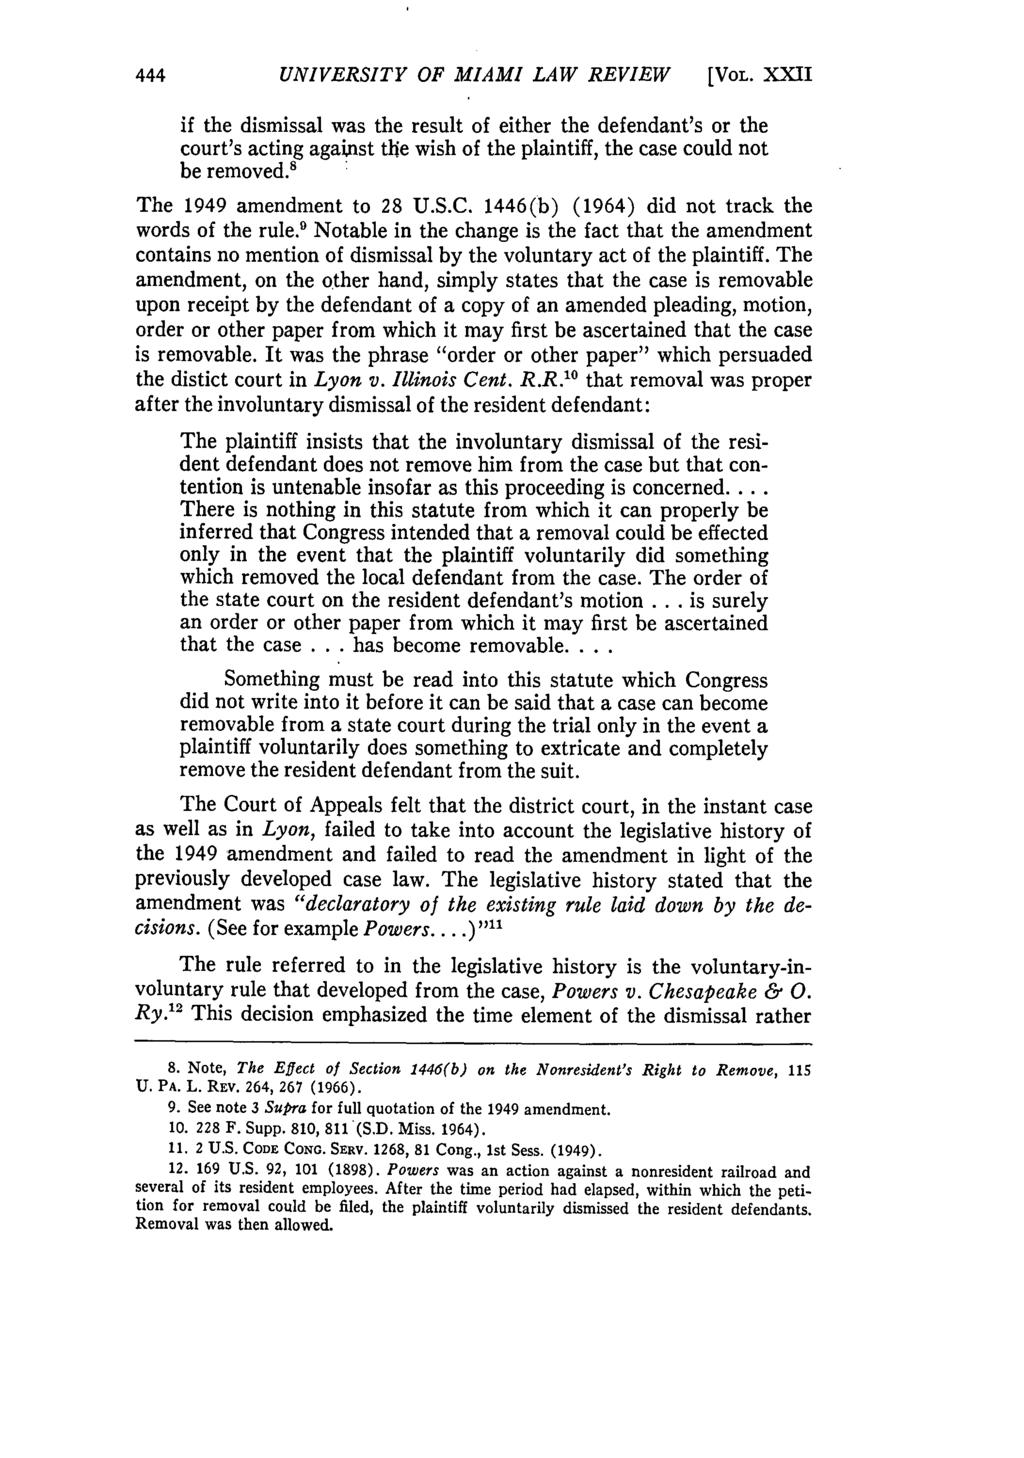 UNIVERSITY OF MIAMI LAW REVIEW [VOL. XXII if the dismissal was the result of either the defendant's or the court's acting against tlhe wish of the plaintiff, the case could not be removed.